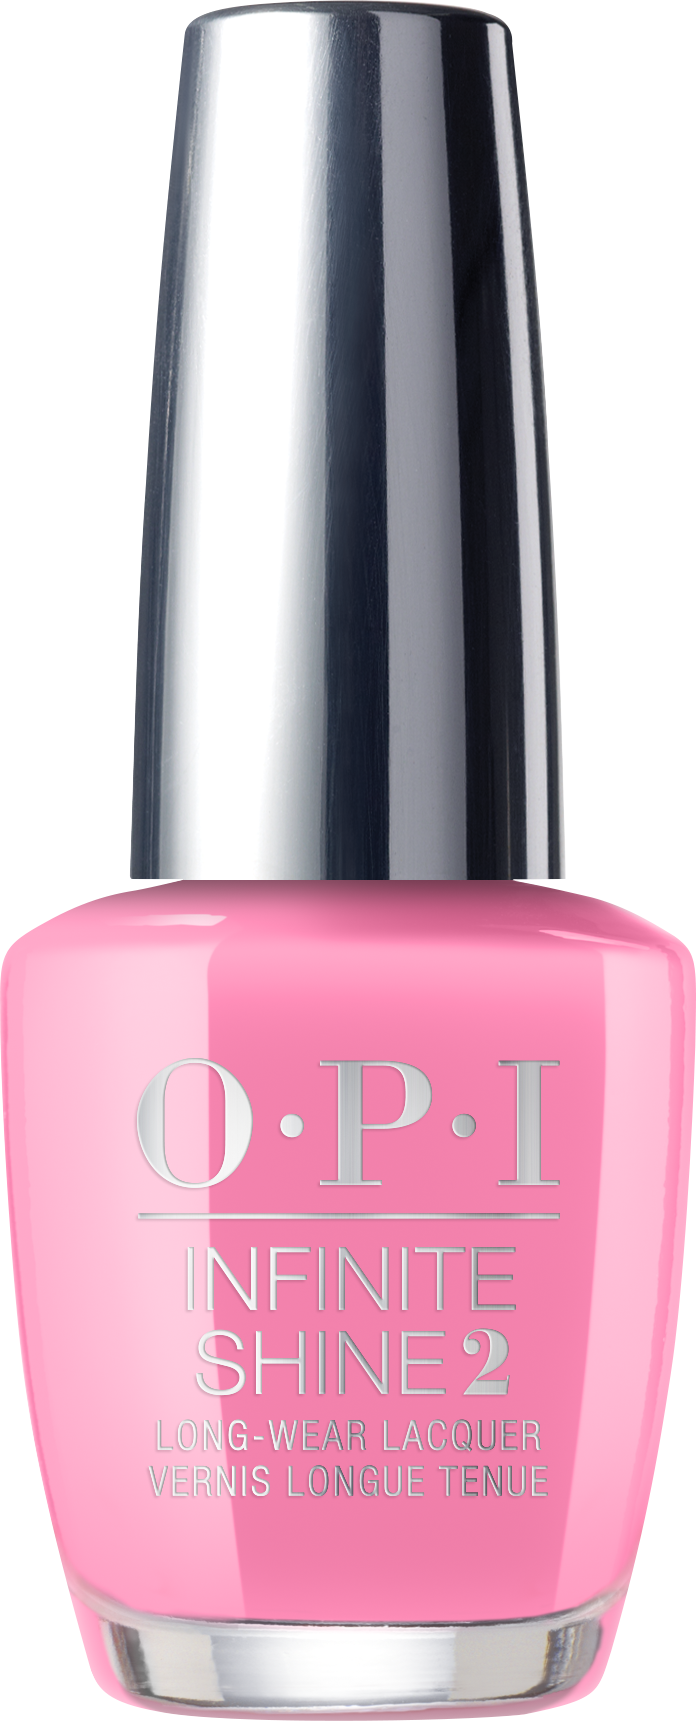 OPI Peru Lima Tell You About This Color!